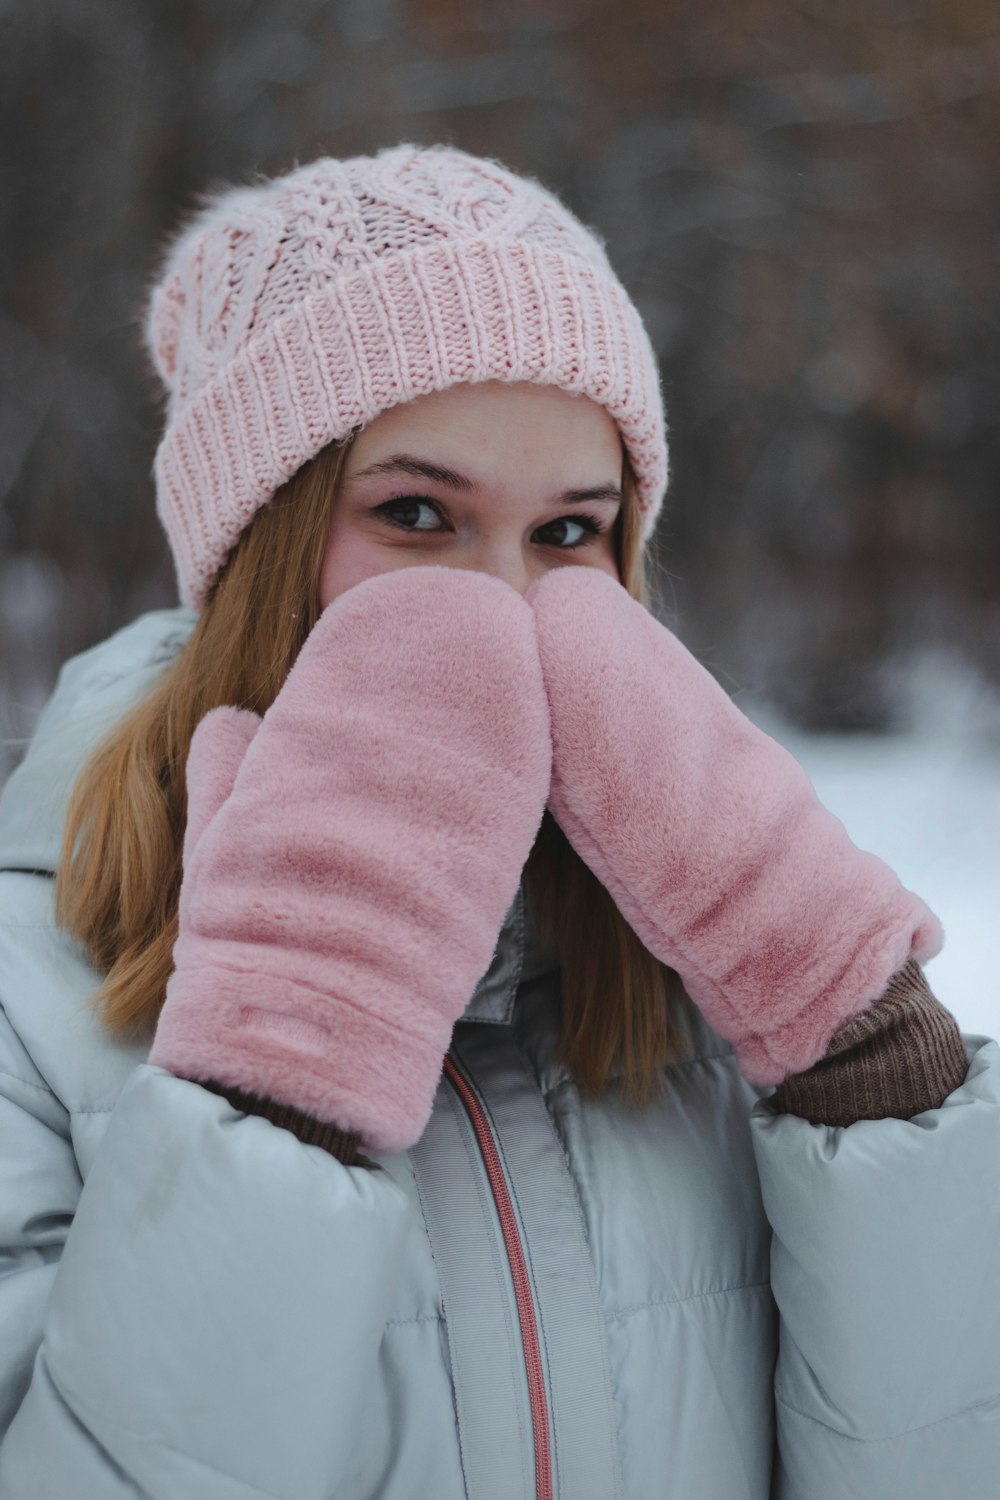 woman in white jacket and pink knit cap